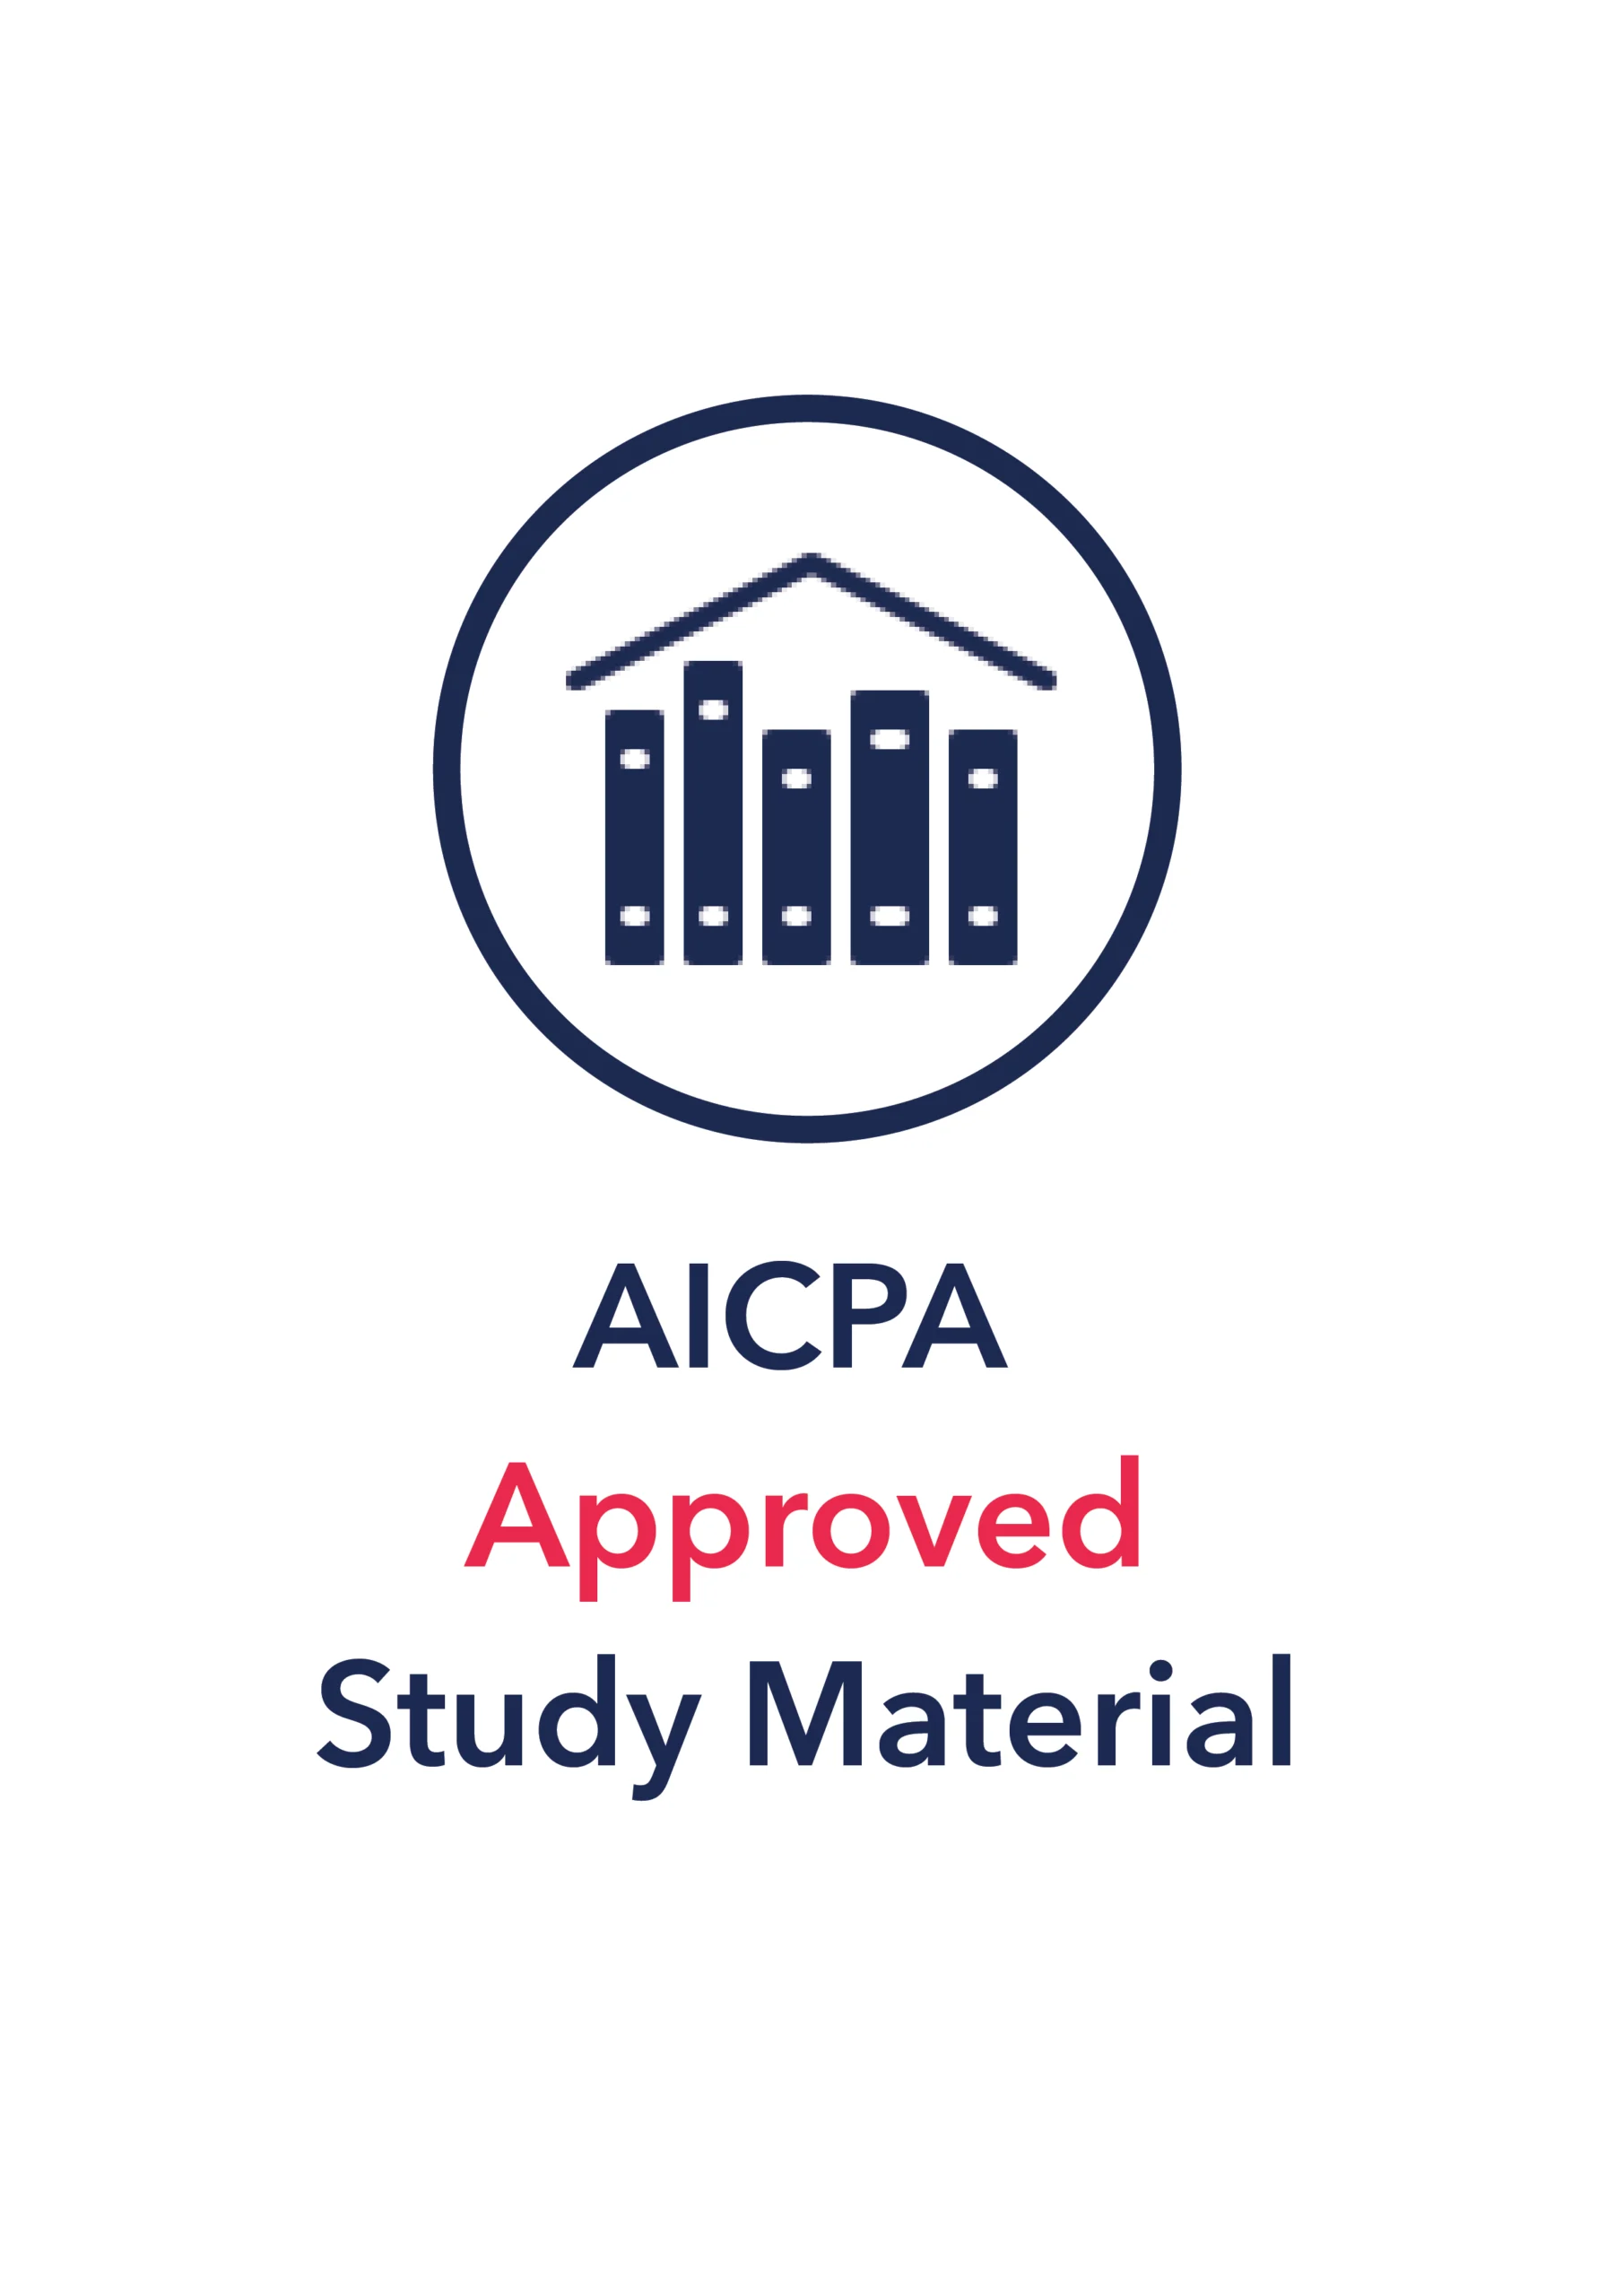 AICPA Approved study material